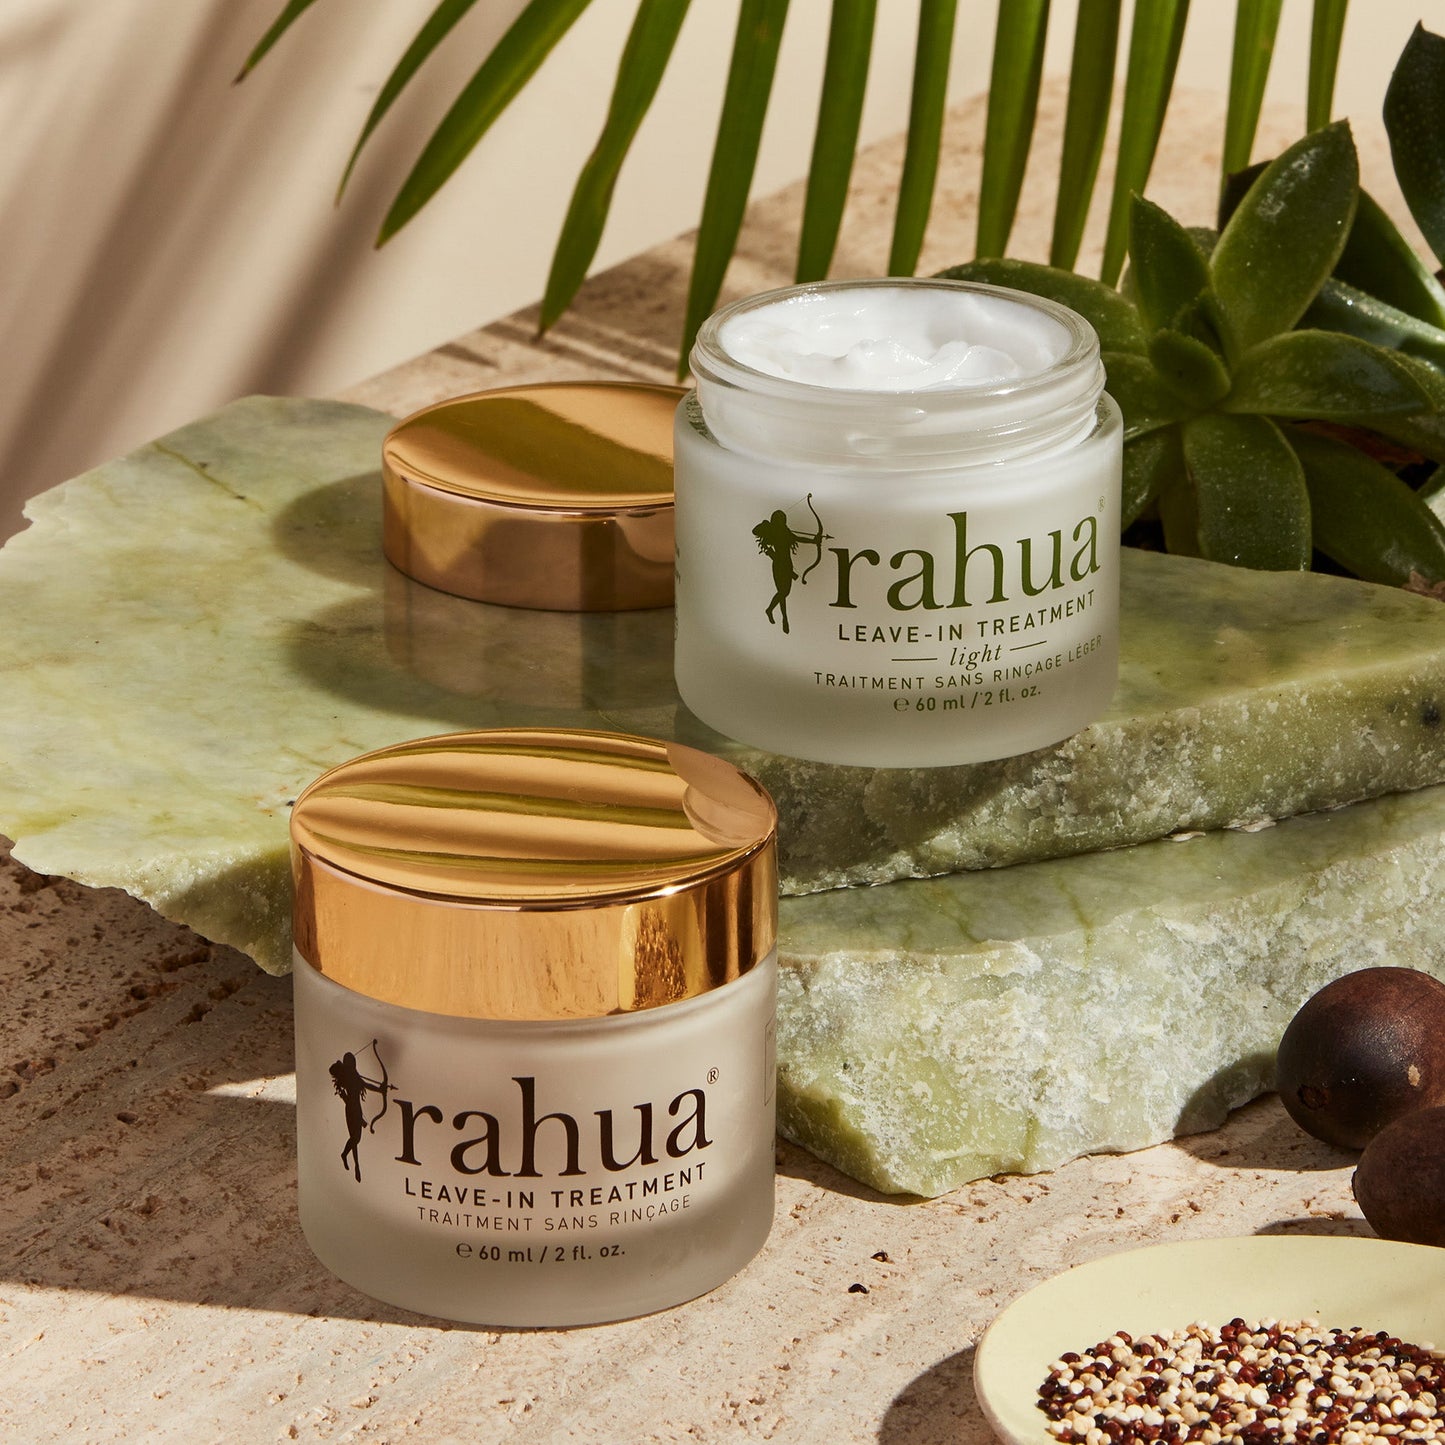 rahua leave in treatment and opened rahua leave in treatment light kept on a marble floor with rahua seeds and green leaves and plant